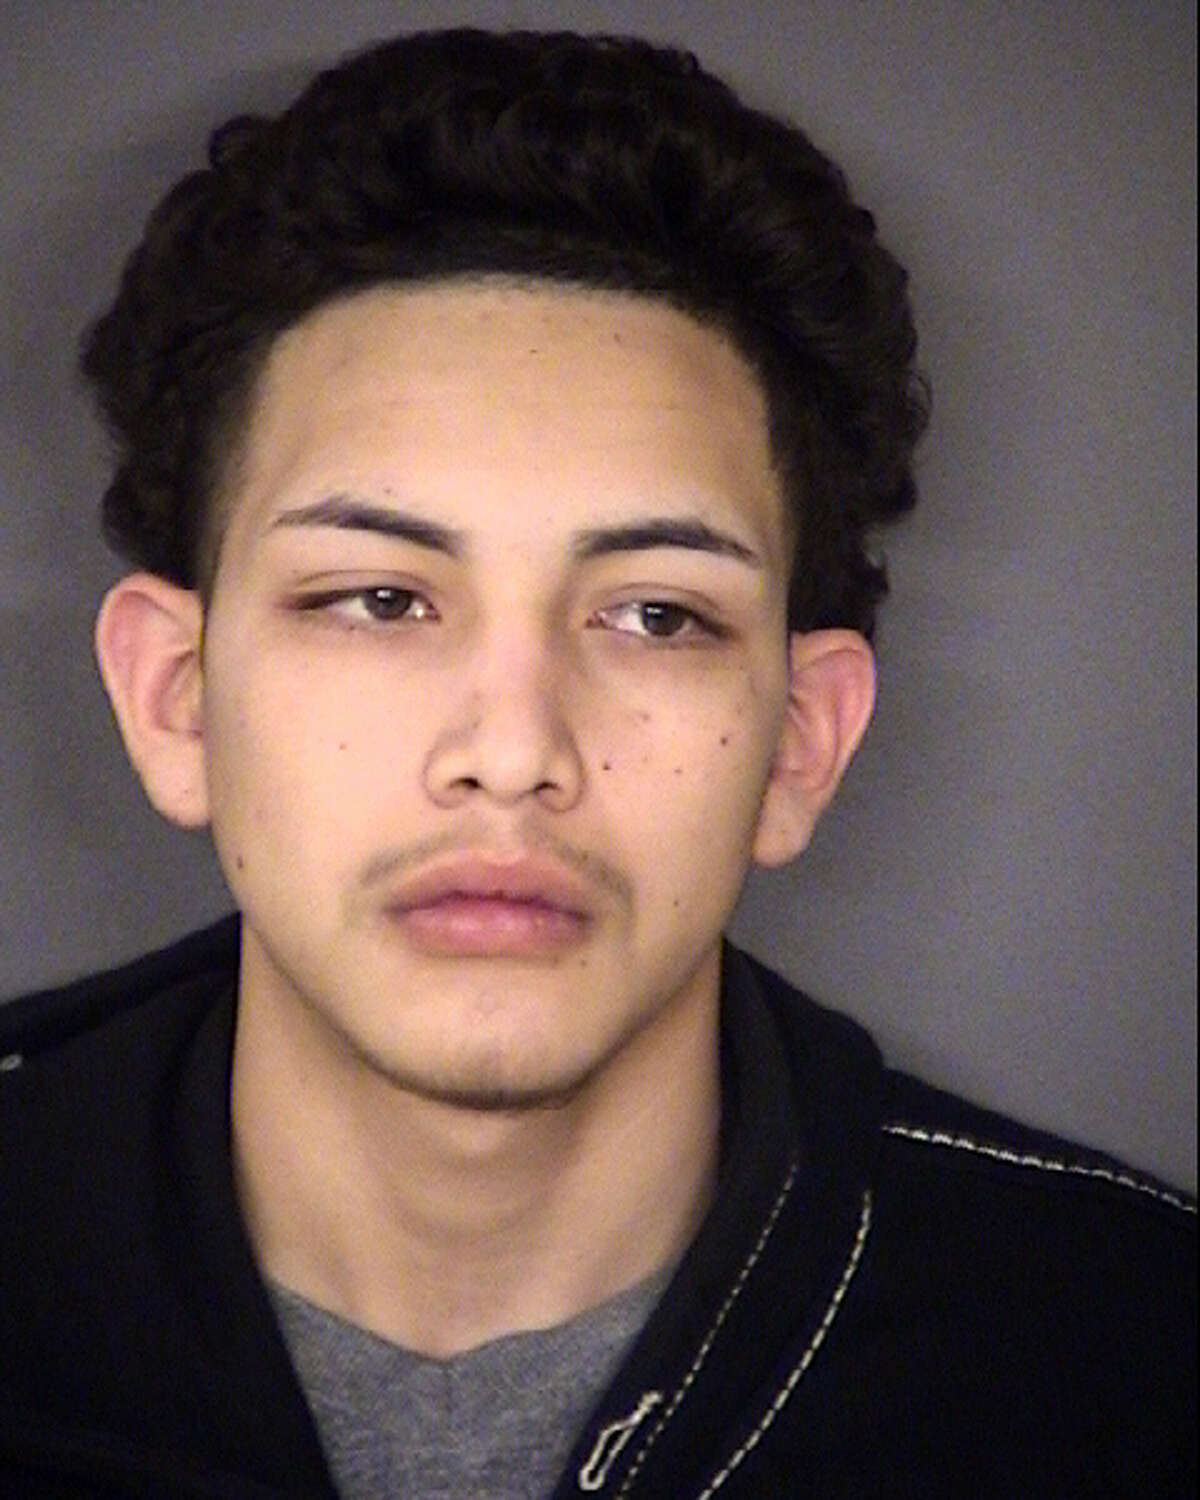 Miguel Garcia, 19, faces a charge of capital murder for his alleged role in the death of Brett Gorecki, according to the San Antonio Police Department.